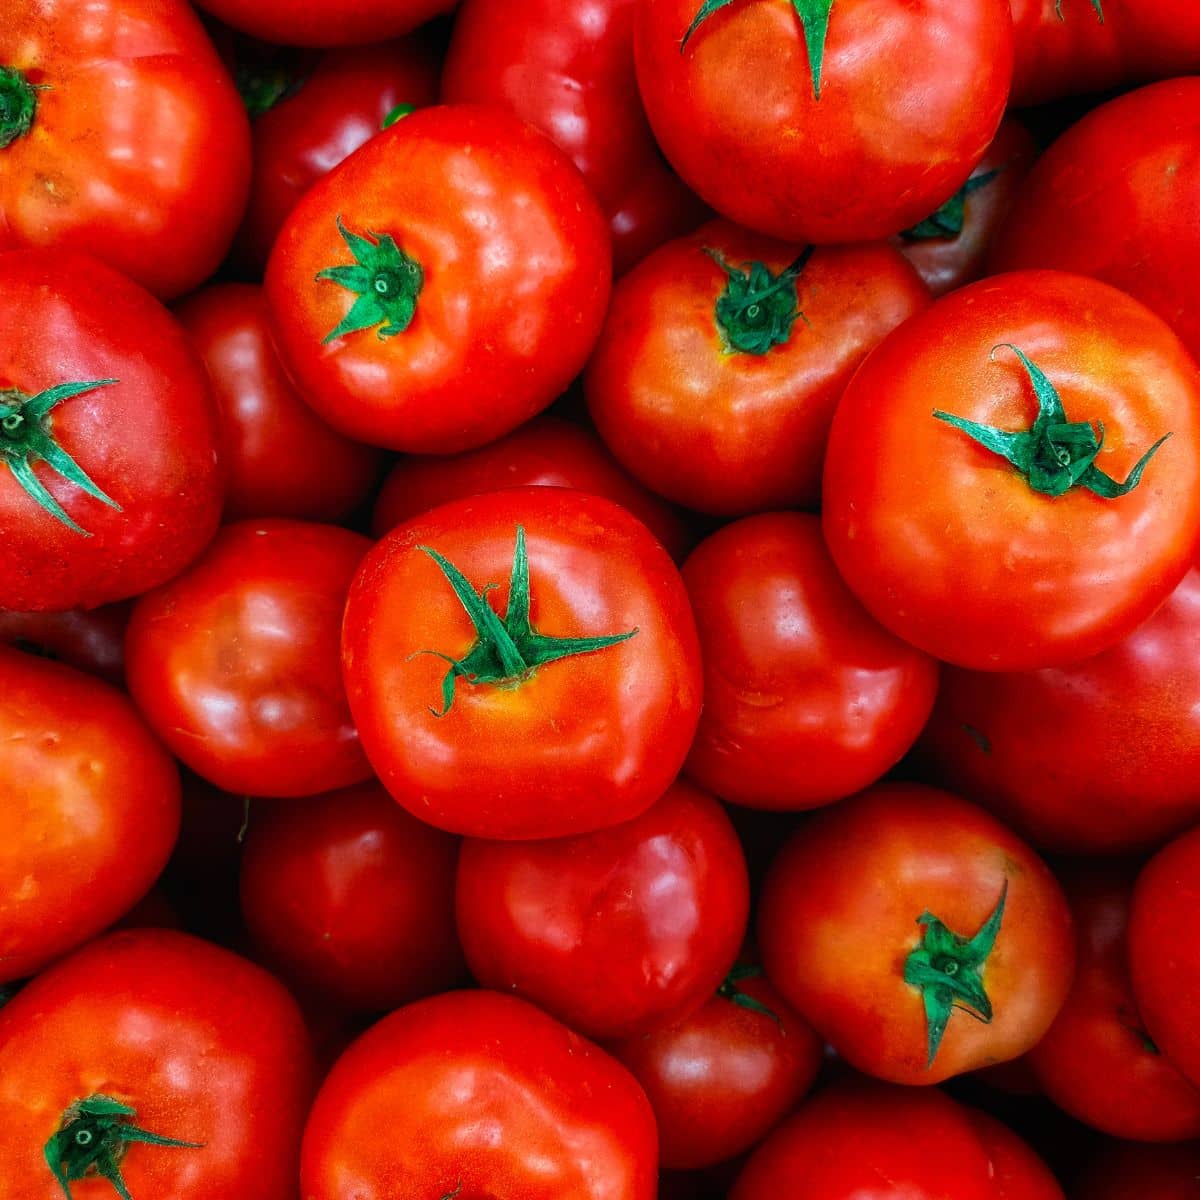 Square image of tomatoes.